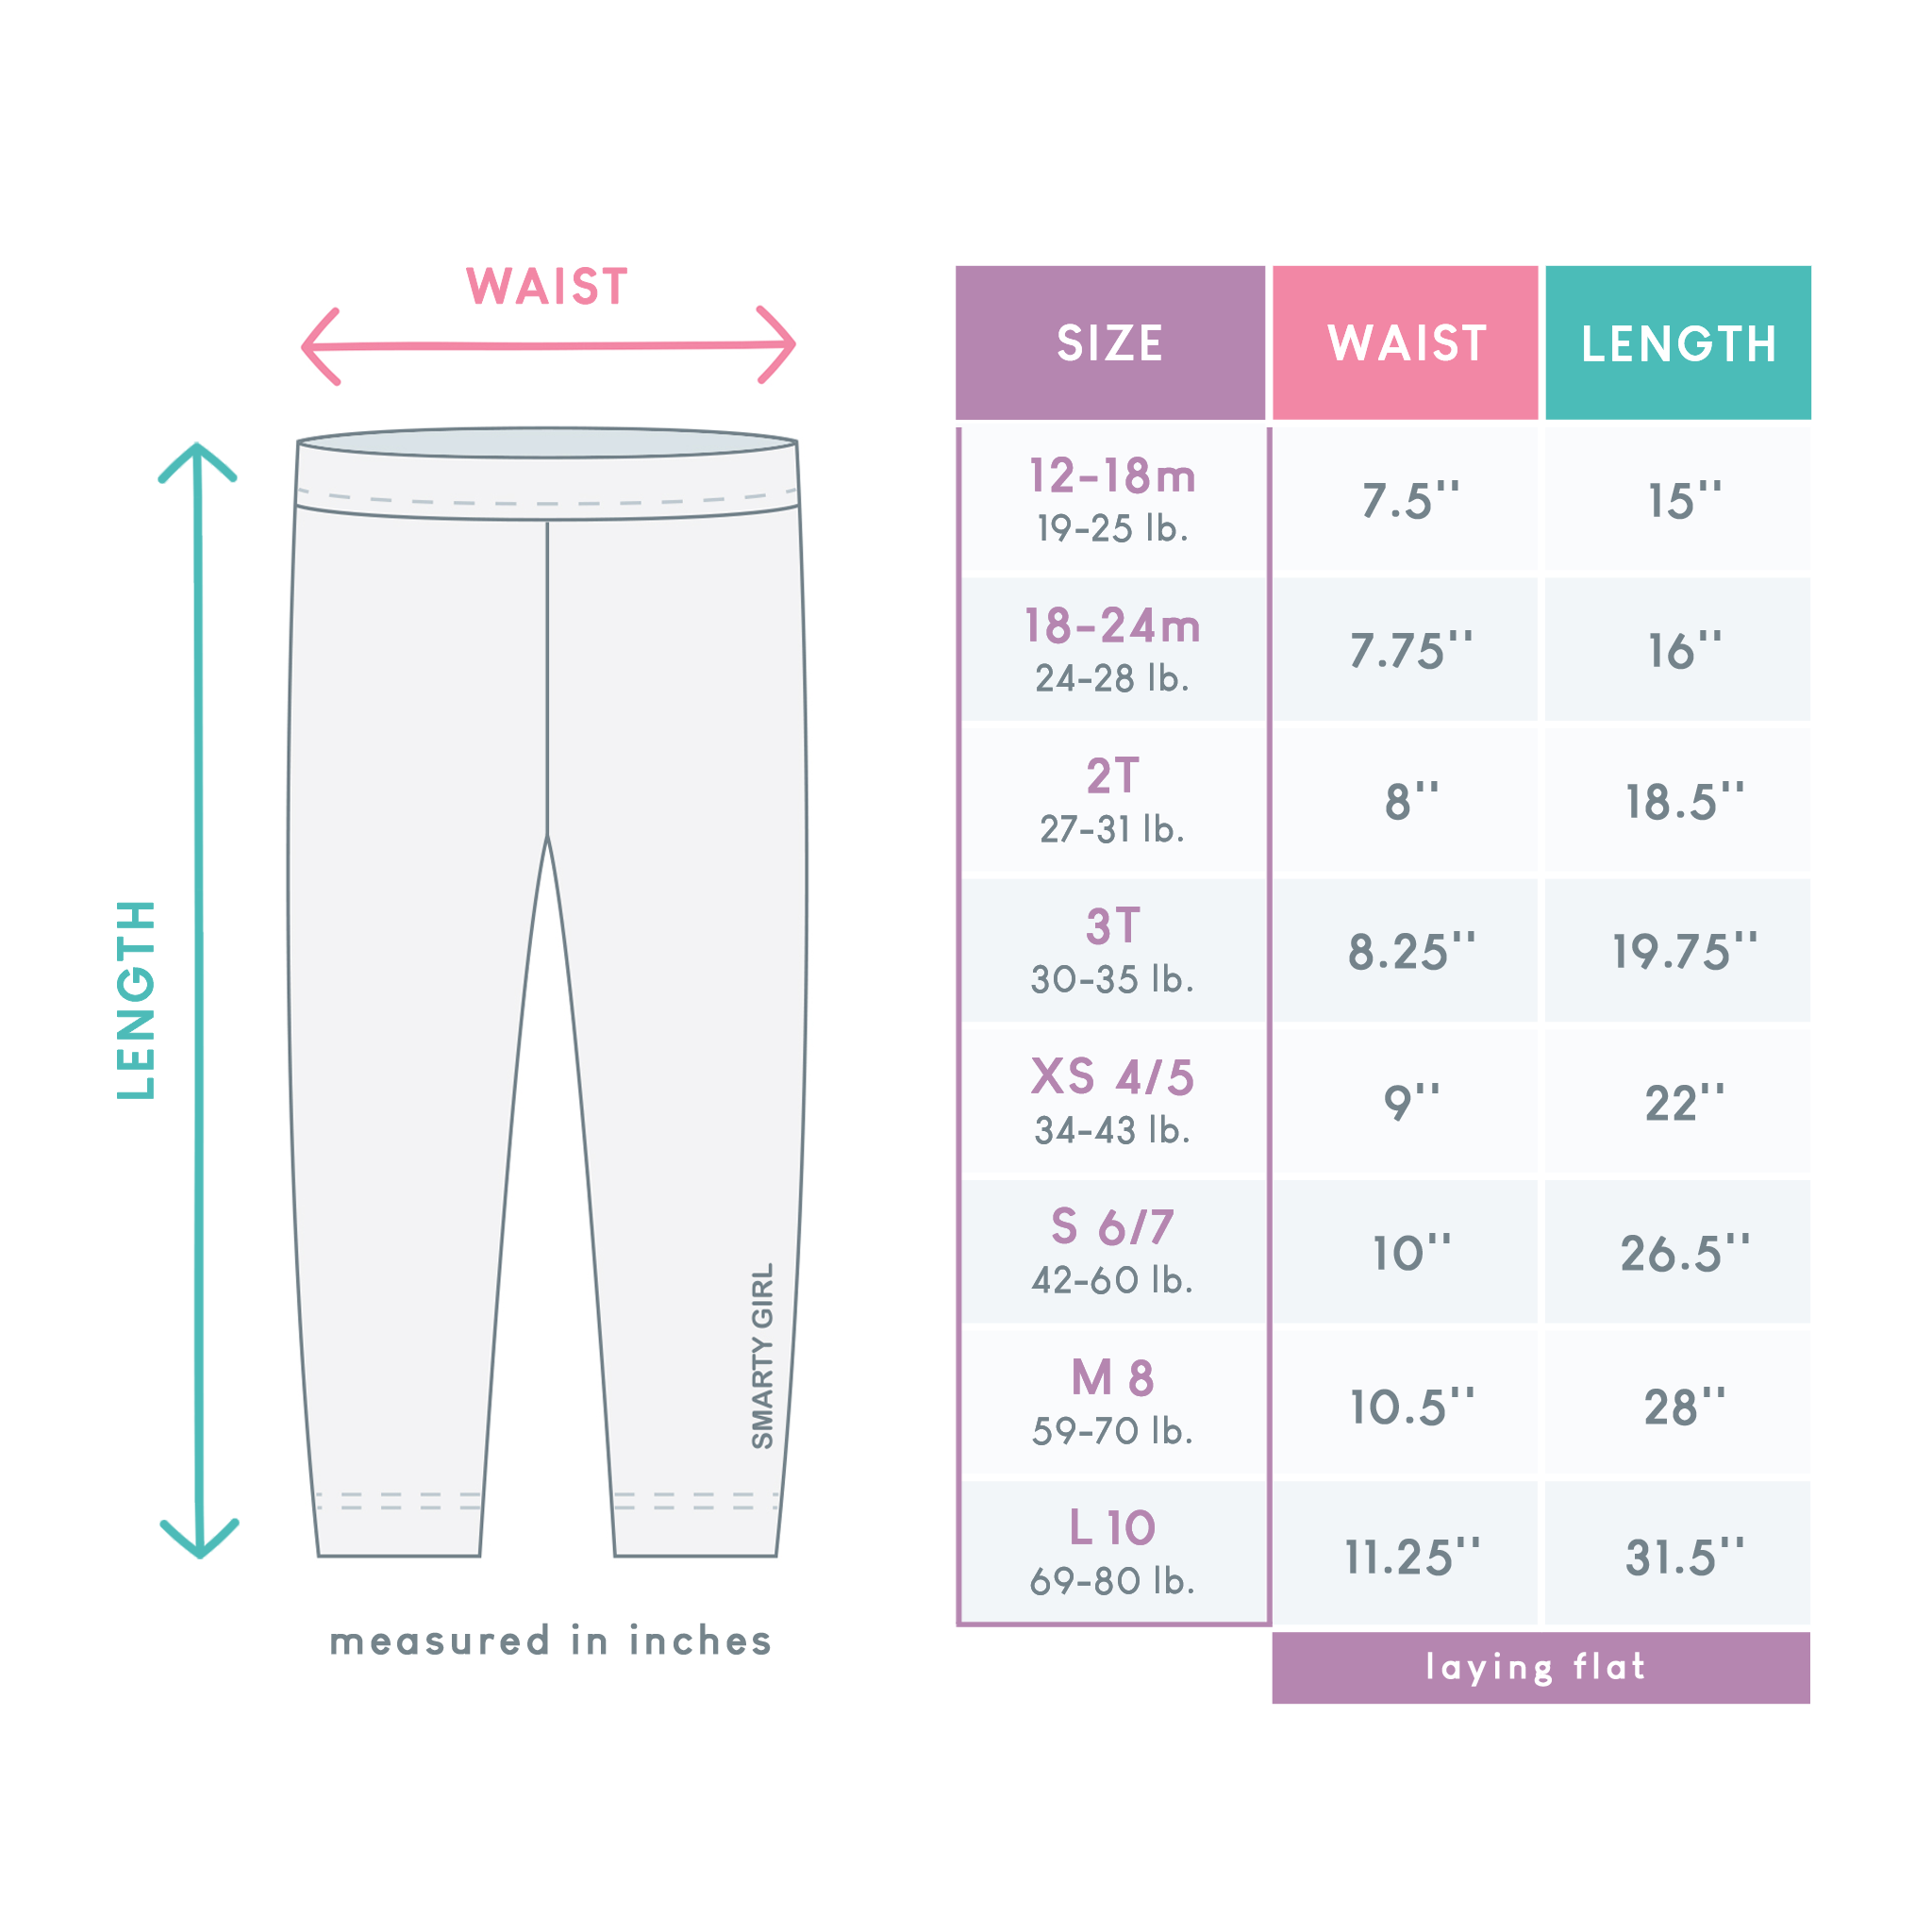 kid size guide